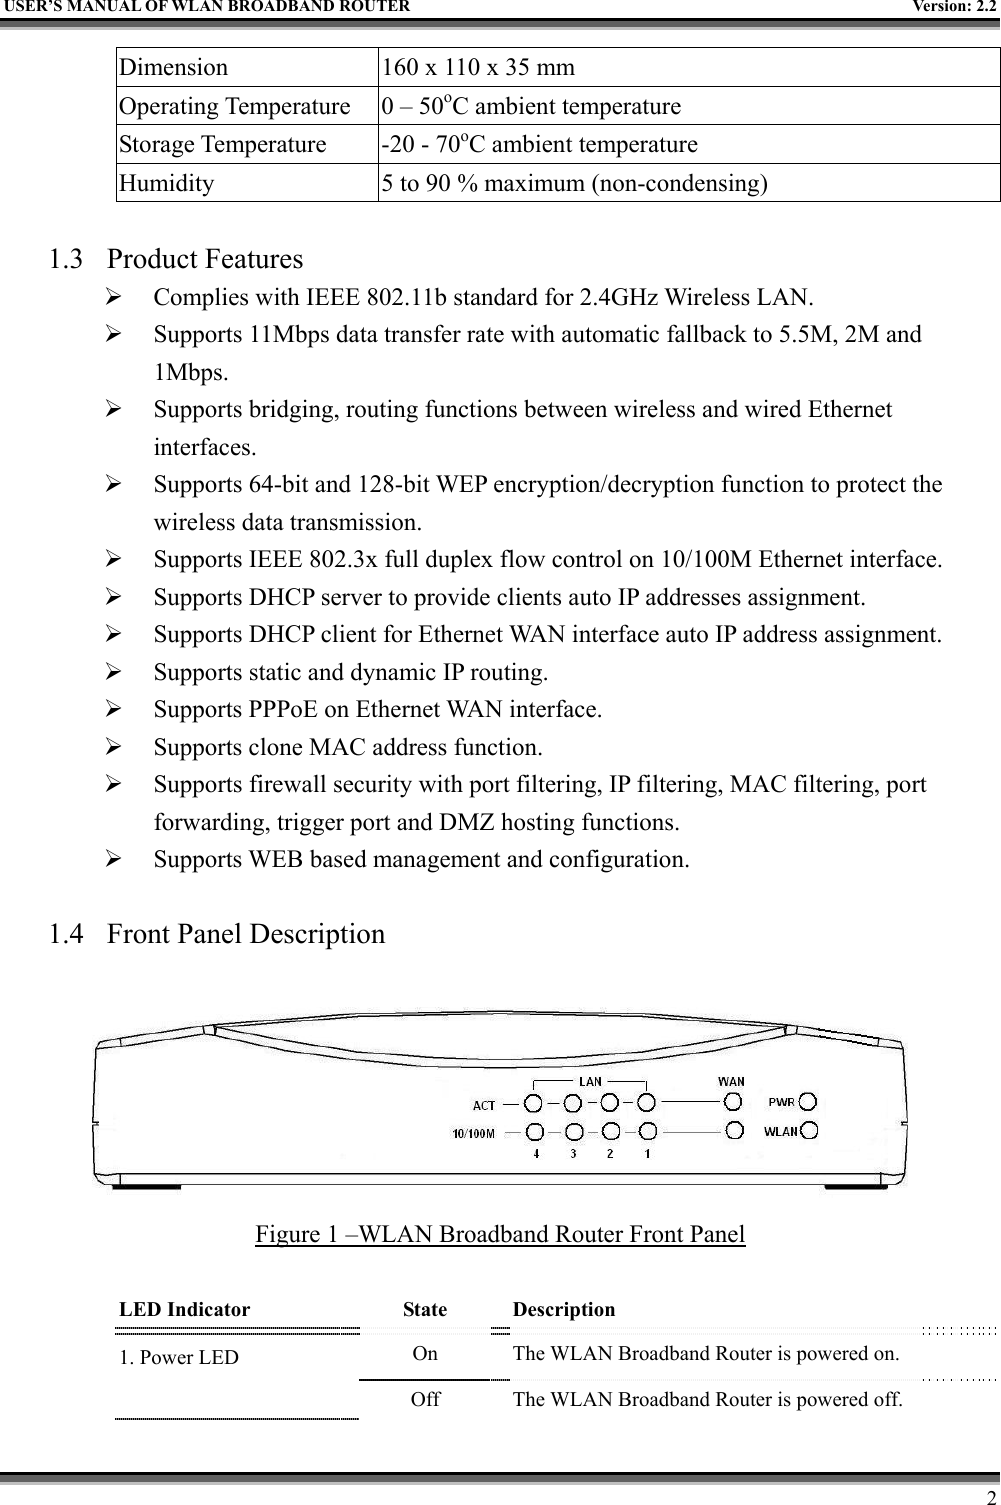   USER’S MANUAL OF WLAN BROADBAND ROUTER    Version: 2.2     2 Dimension  160 x 110 x 35 mm Operating Temperature  0 – 50oC ambient temperature Storage Temperature  -20 - 70oC ambient temperature Humidity  5 to 90 % maximum (non-condensing)  1.3 Product Features   Complies with IEEE 802.11b standard for 2.4GHz Wireless LAN.   Supports 11Mbps data transfer rate with automatic fallback to 5.5M, 2M and 1Mbps.    Supports bridging, routing functions between wireless and wired Ethernet interfaces.   Supports 64-bit and 128-bit WEP encryption/decryption function to protect the wireless data transmission.   Supports IEEE 802.3x full duplex flow control on 10/100M Ethernet interface.   Supports DHCP server to provide clients auto IP addresses assignment.   Supports DHCP client for Ethernet WAN interface auto IP address assignment.   Supports static and dynamic IP routing.   Supports PPPoE on Ethernet WAN interface.   Supports clone MAC address function.   Supports firewall security with port filtering, IP filtering, MAC filtering, port forwarding, trigger port and DMZ hosting functions.   Supports WEB based management and configuration.  1.4  Front Panel Description   Figure 1 –WLAN Broadband Router Front Panel  LED Indicator    State  Description 1. Power LED      On  The WLAN Broadband Router is powered on.     Off  The WLAN Broadband Router is powered off. 